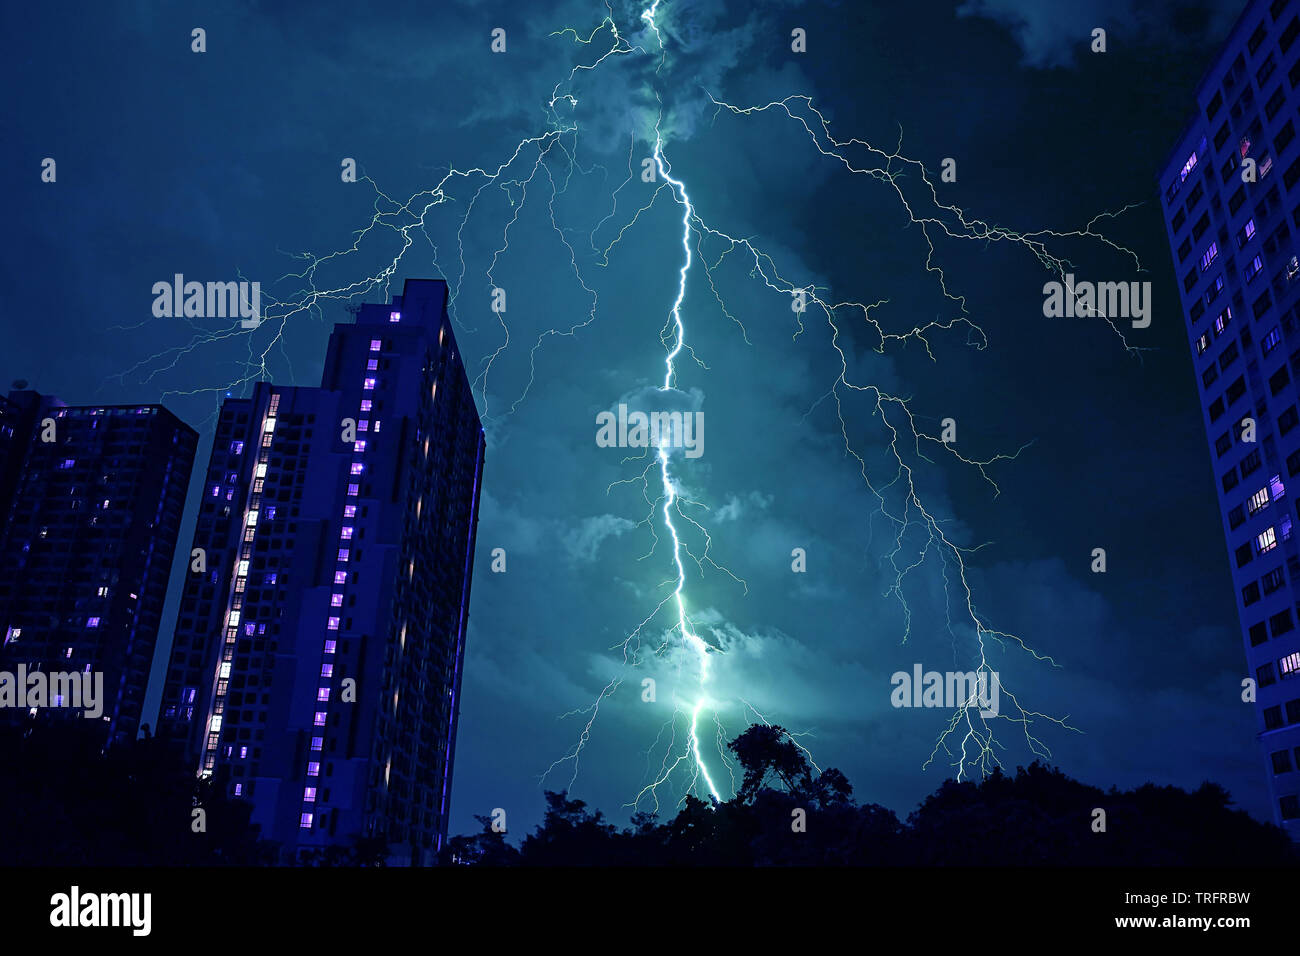 Incredible Real Lightning Striking the Night Sky in Mystique Blue Color Stock Photo